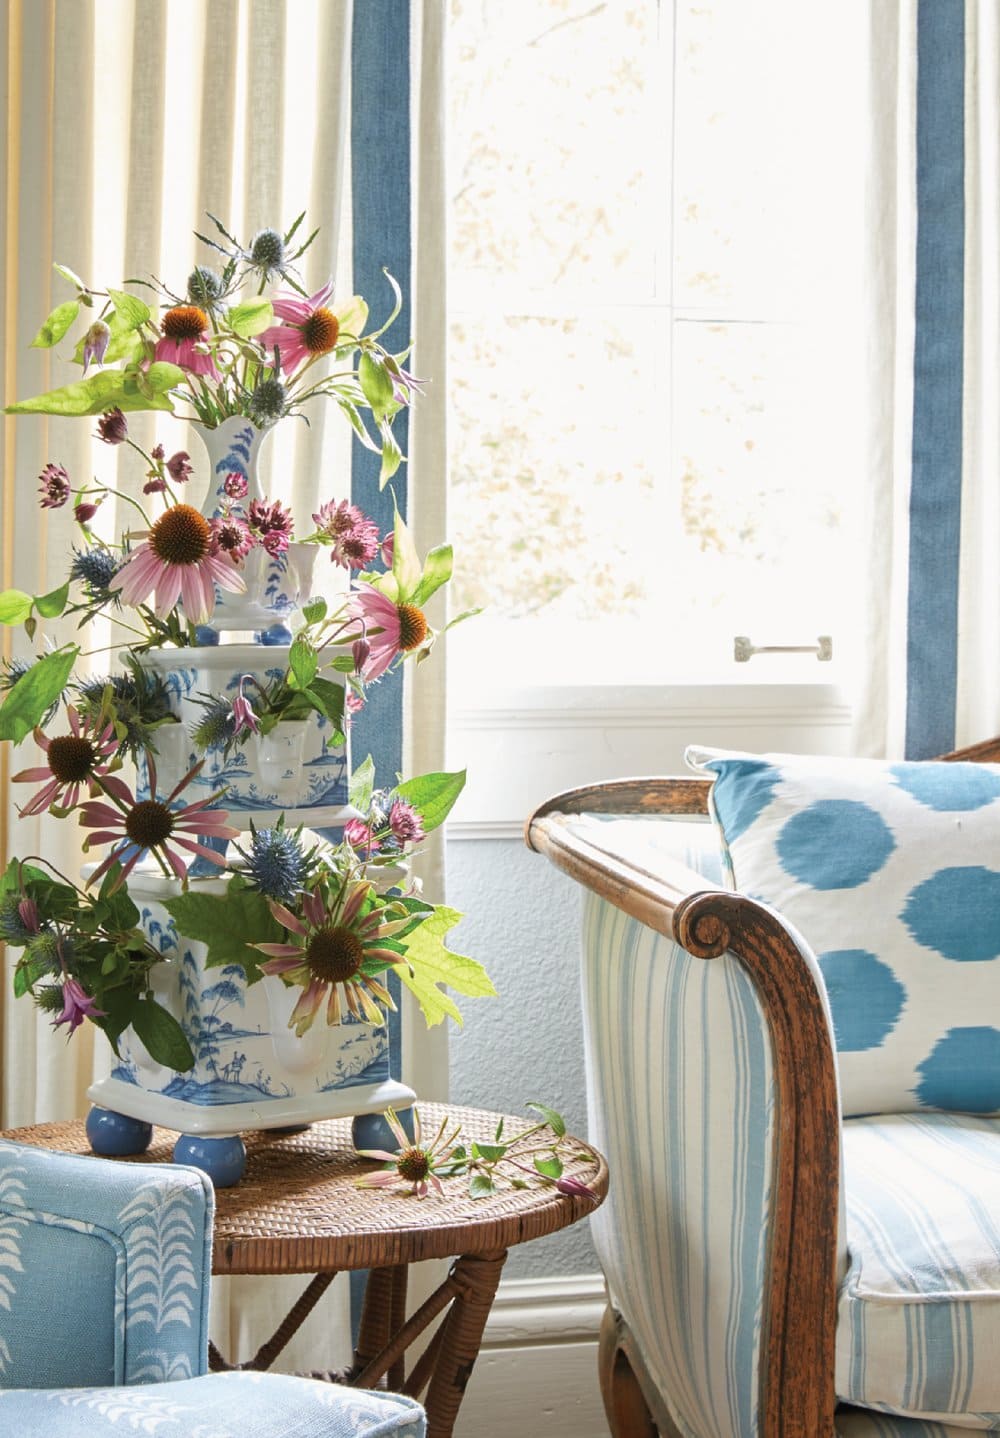 Detail of living room featuring floral arrangement featured in interiors designed by Heather Chadduck